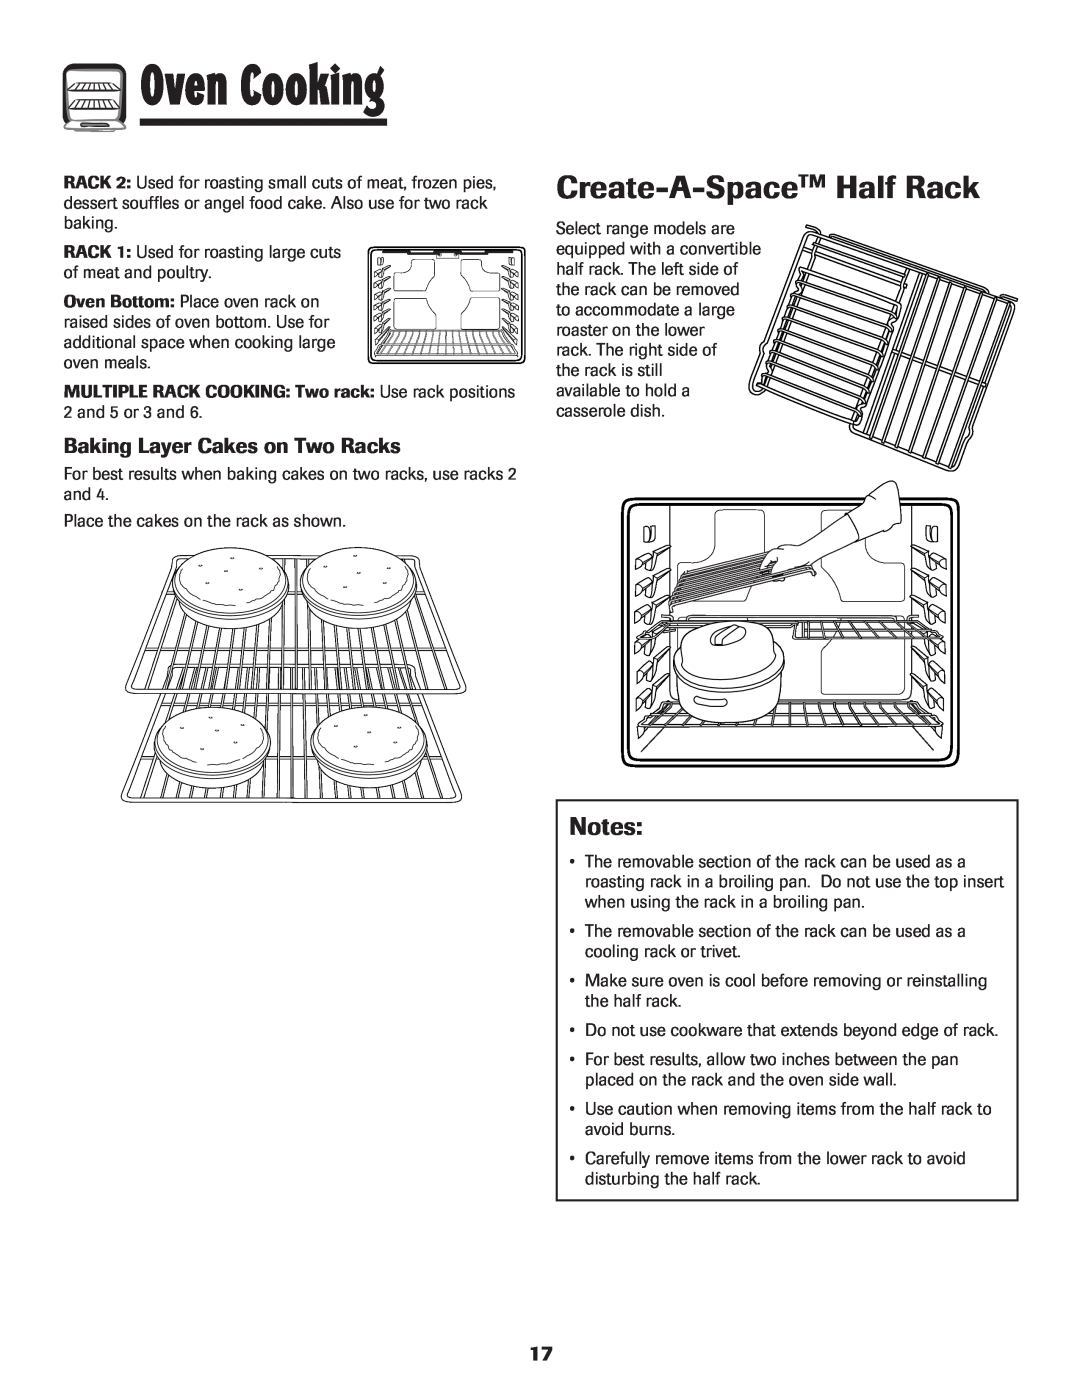 Maytag Range important safety instructions Create-A-SpaceTM Half Rack, Baking Layer Cakes on Two Racks, Oven Cooking 